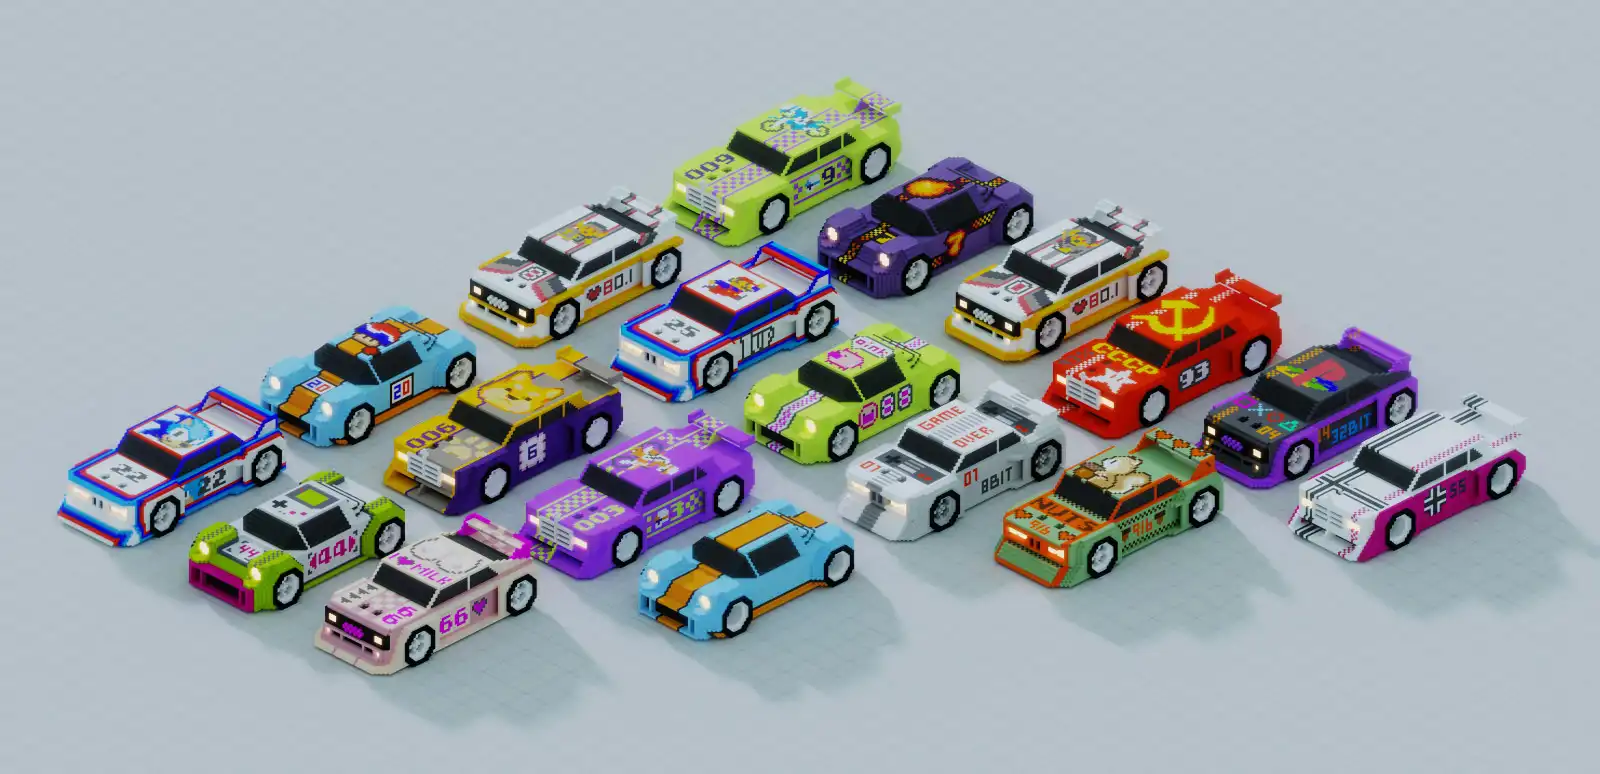 Voxel adaption of iconic German cars